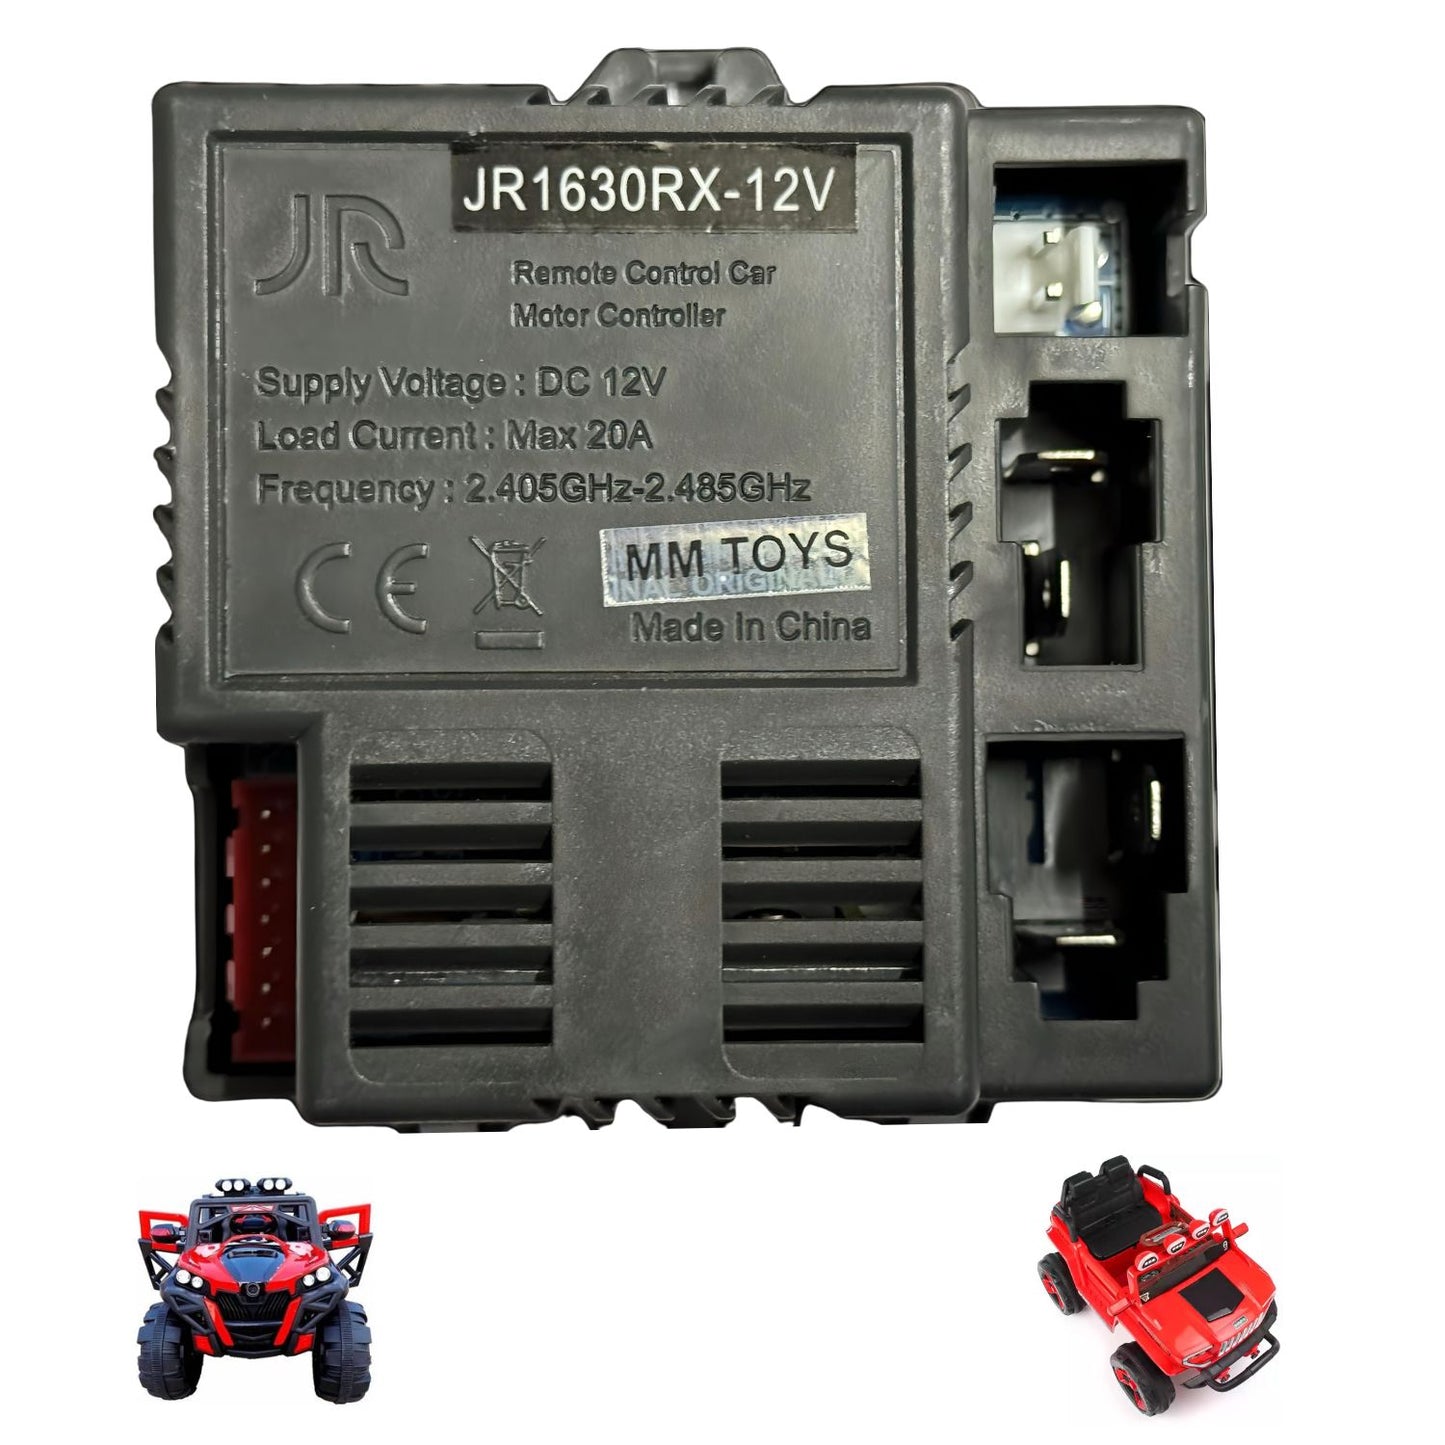 MM TOYS JR1630RX Reciever Motor Controller 12V 2.4Ghz 7 Pin, High-Efficiency Control Box for Kids Electric Car - Essential Toy Replacement Part